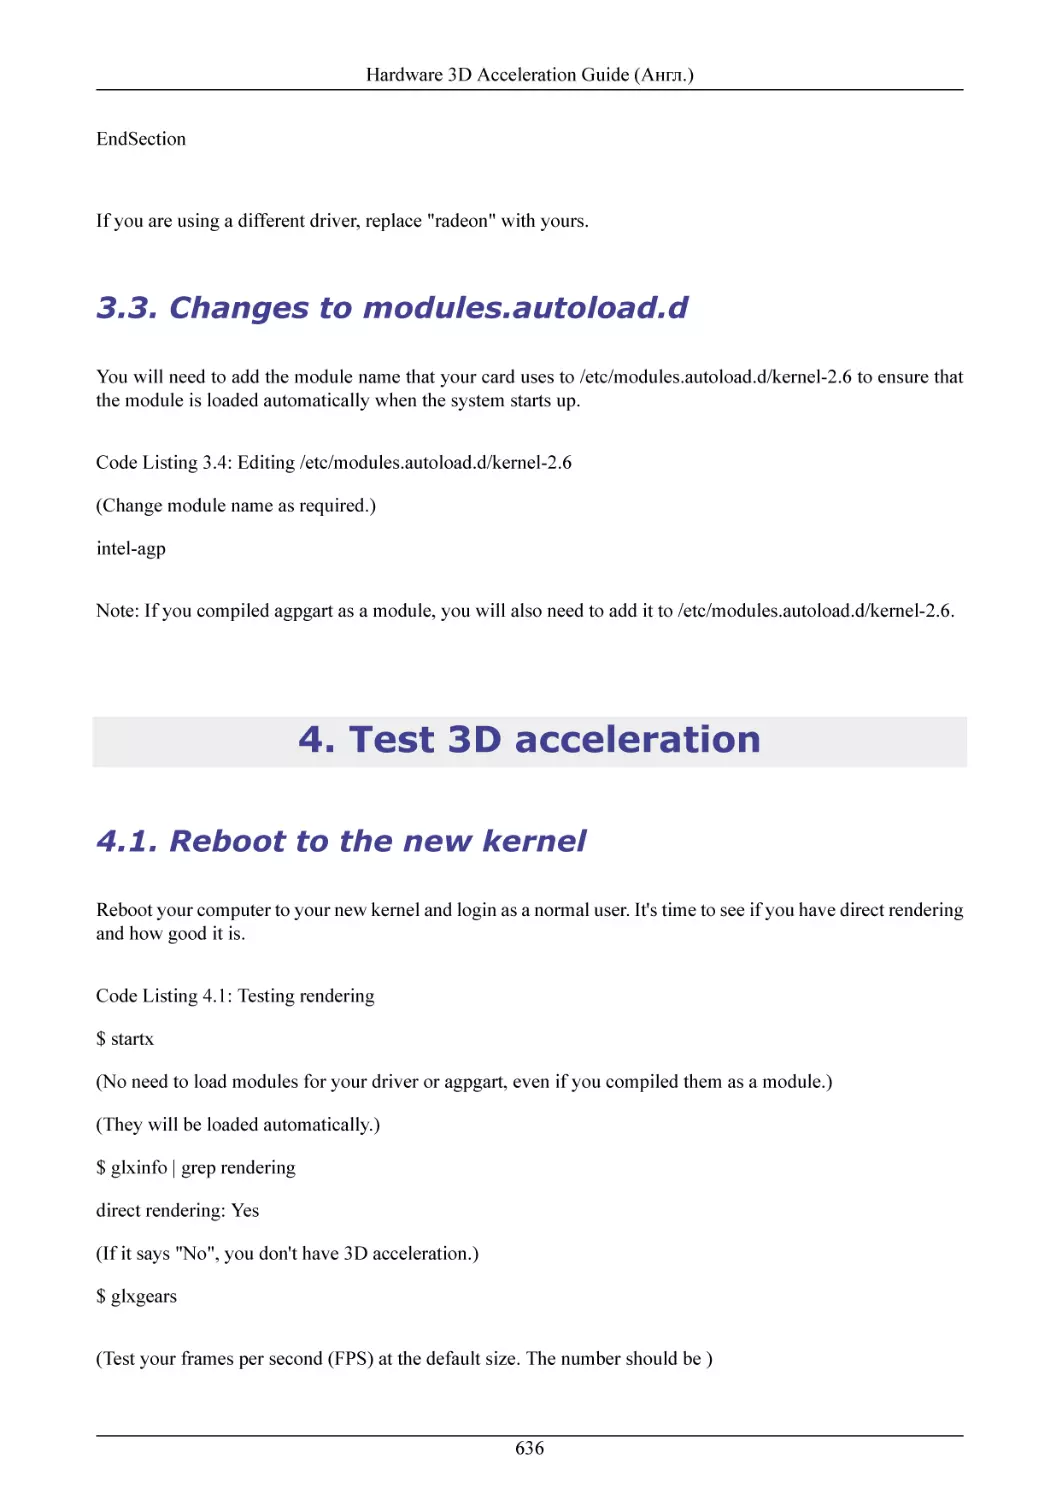 Changes to modules.autoload.d
Test 3D acceleration
Reboot to the new kernel